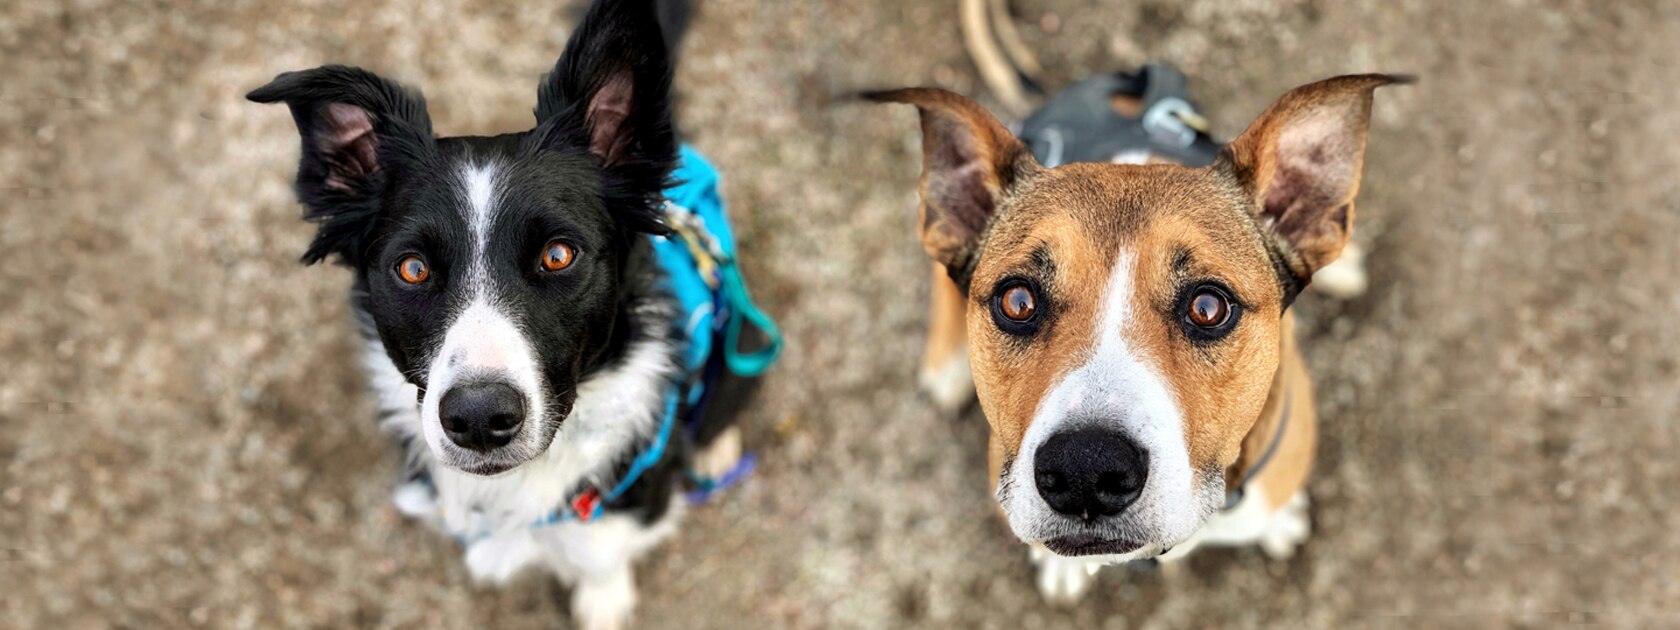 a black and white dog and brown dog sit next to each other looking up at the camera